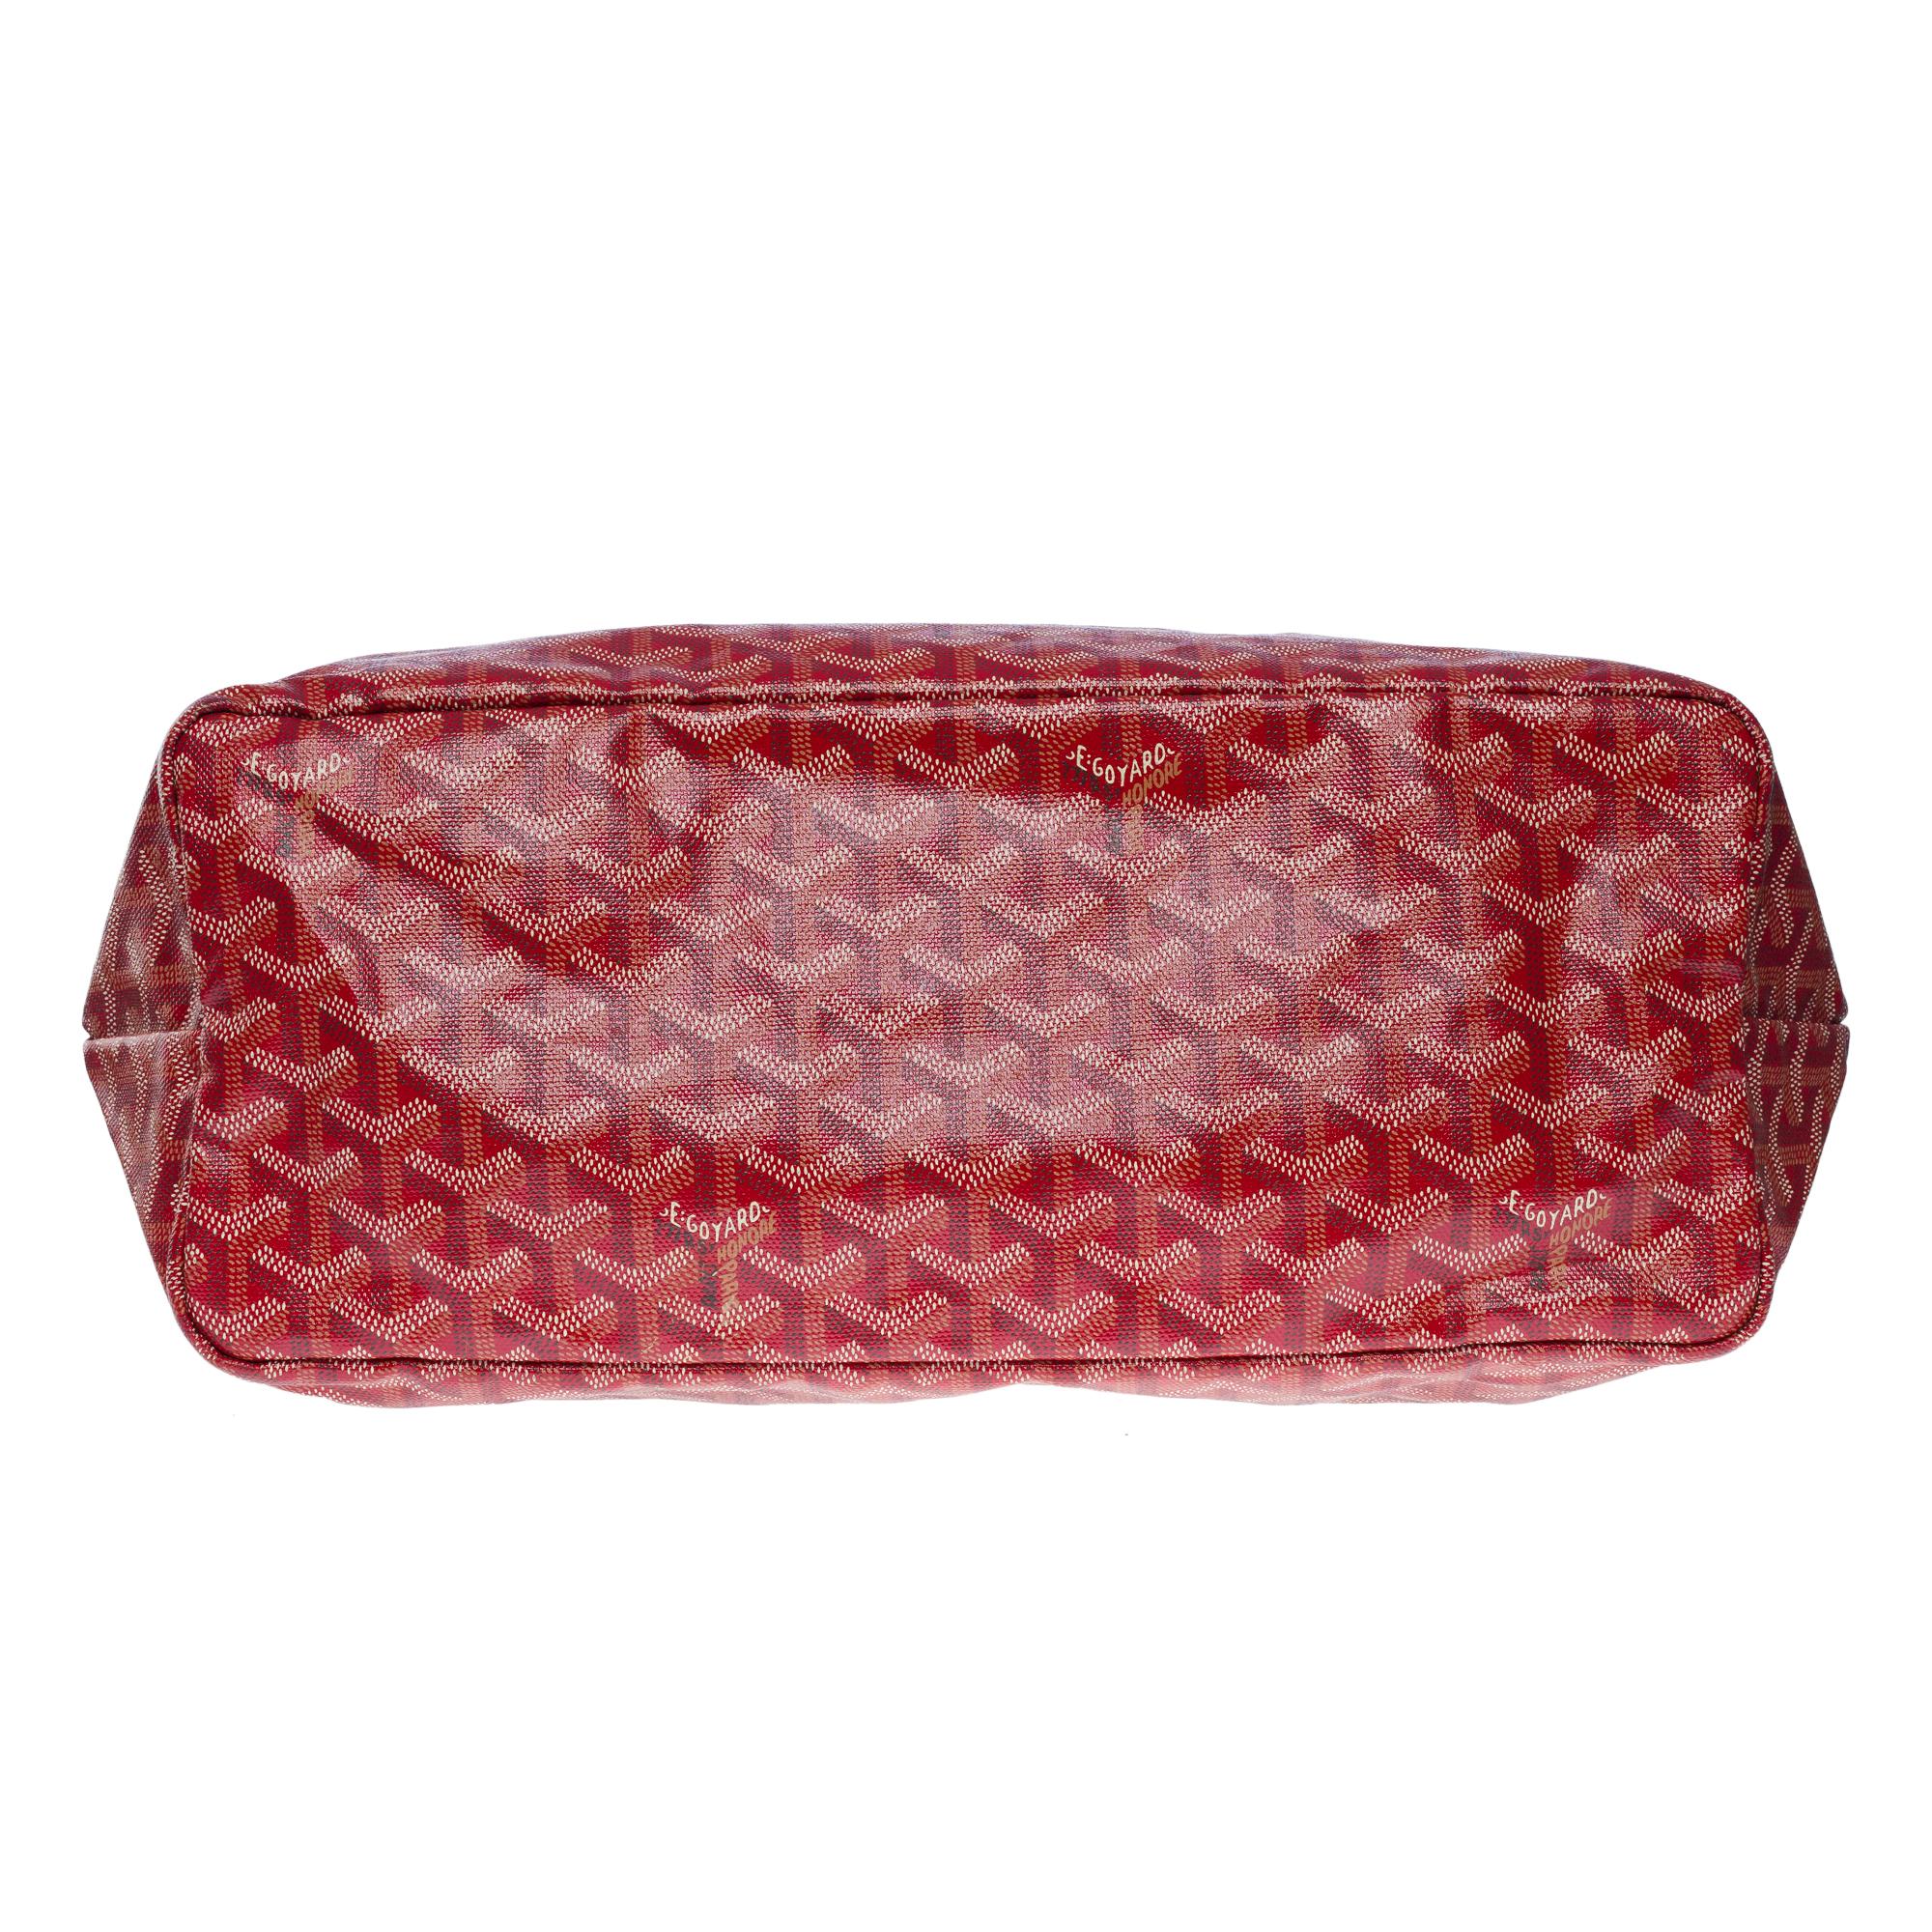 The Coveted Goyard Saint-Louis PM Tote bag in Red canvas and leather, SHW 5